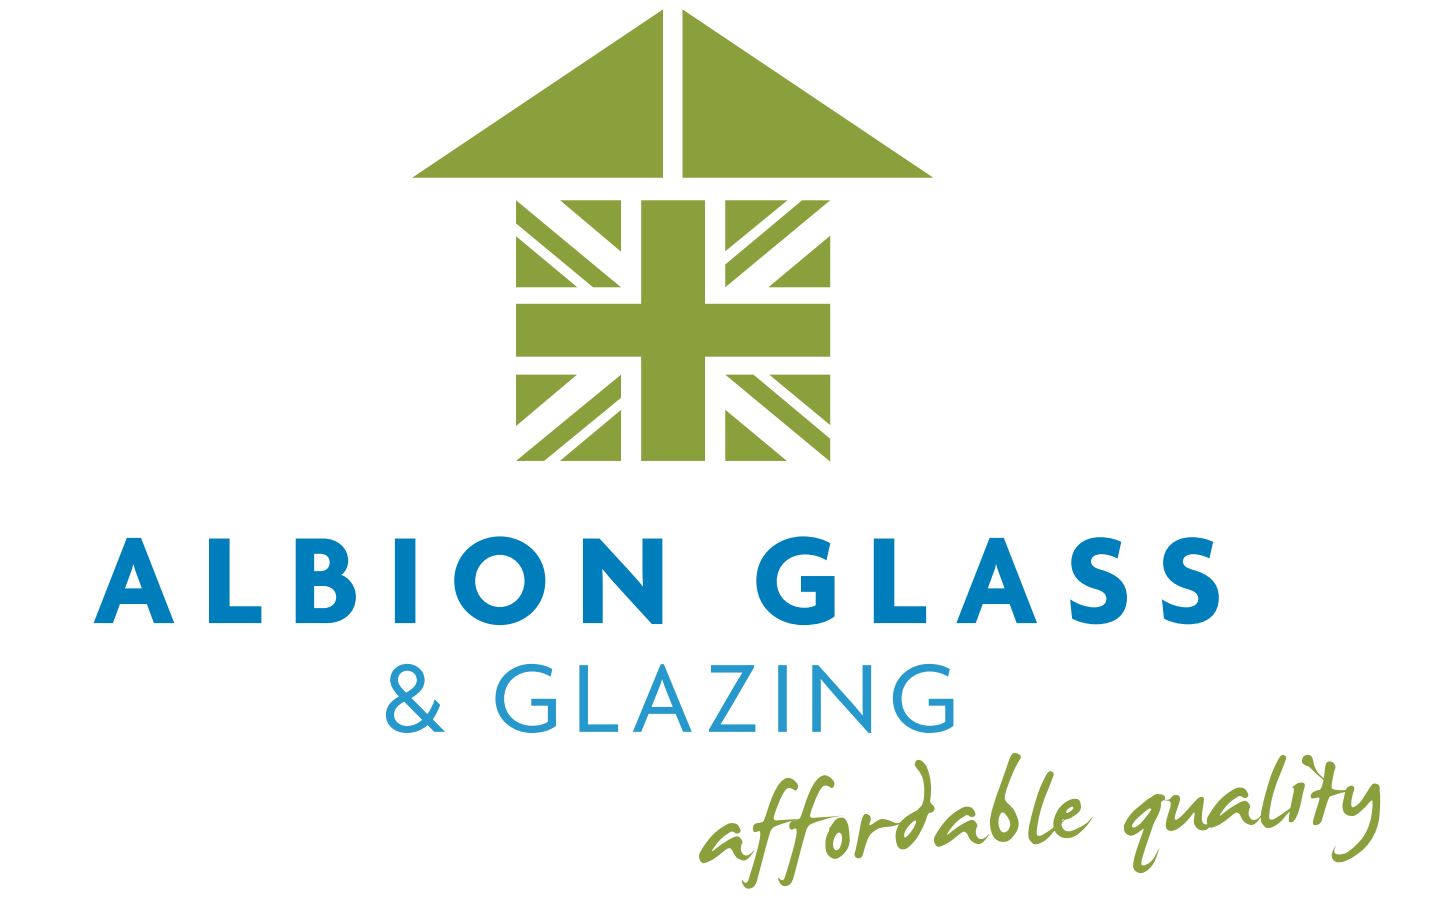 Affordable Quality from Albion Glass and Glazing